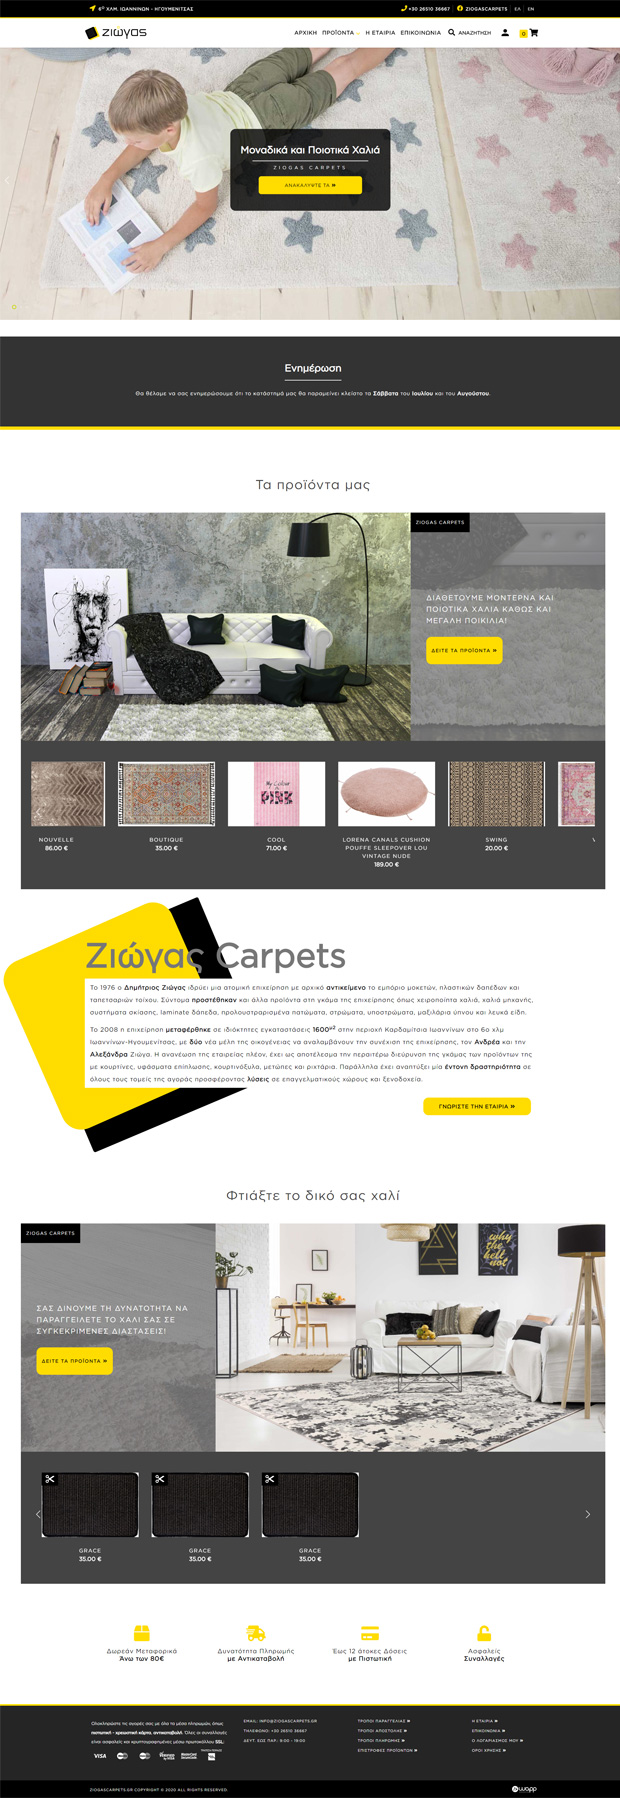 Responsive eshop for Ziogas Carpets in Ioannina